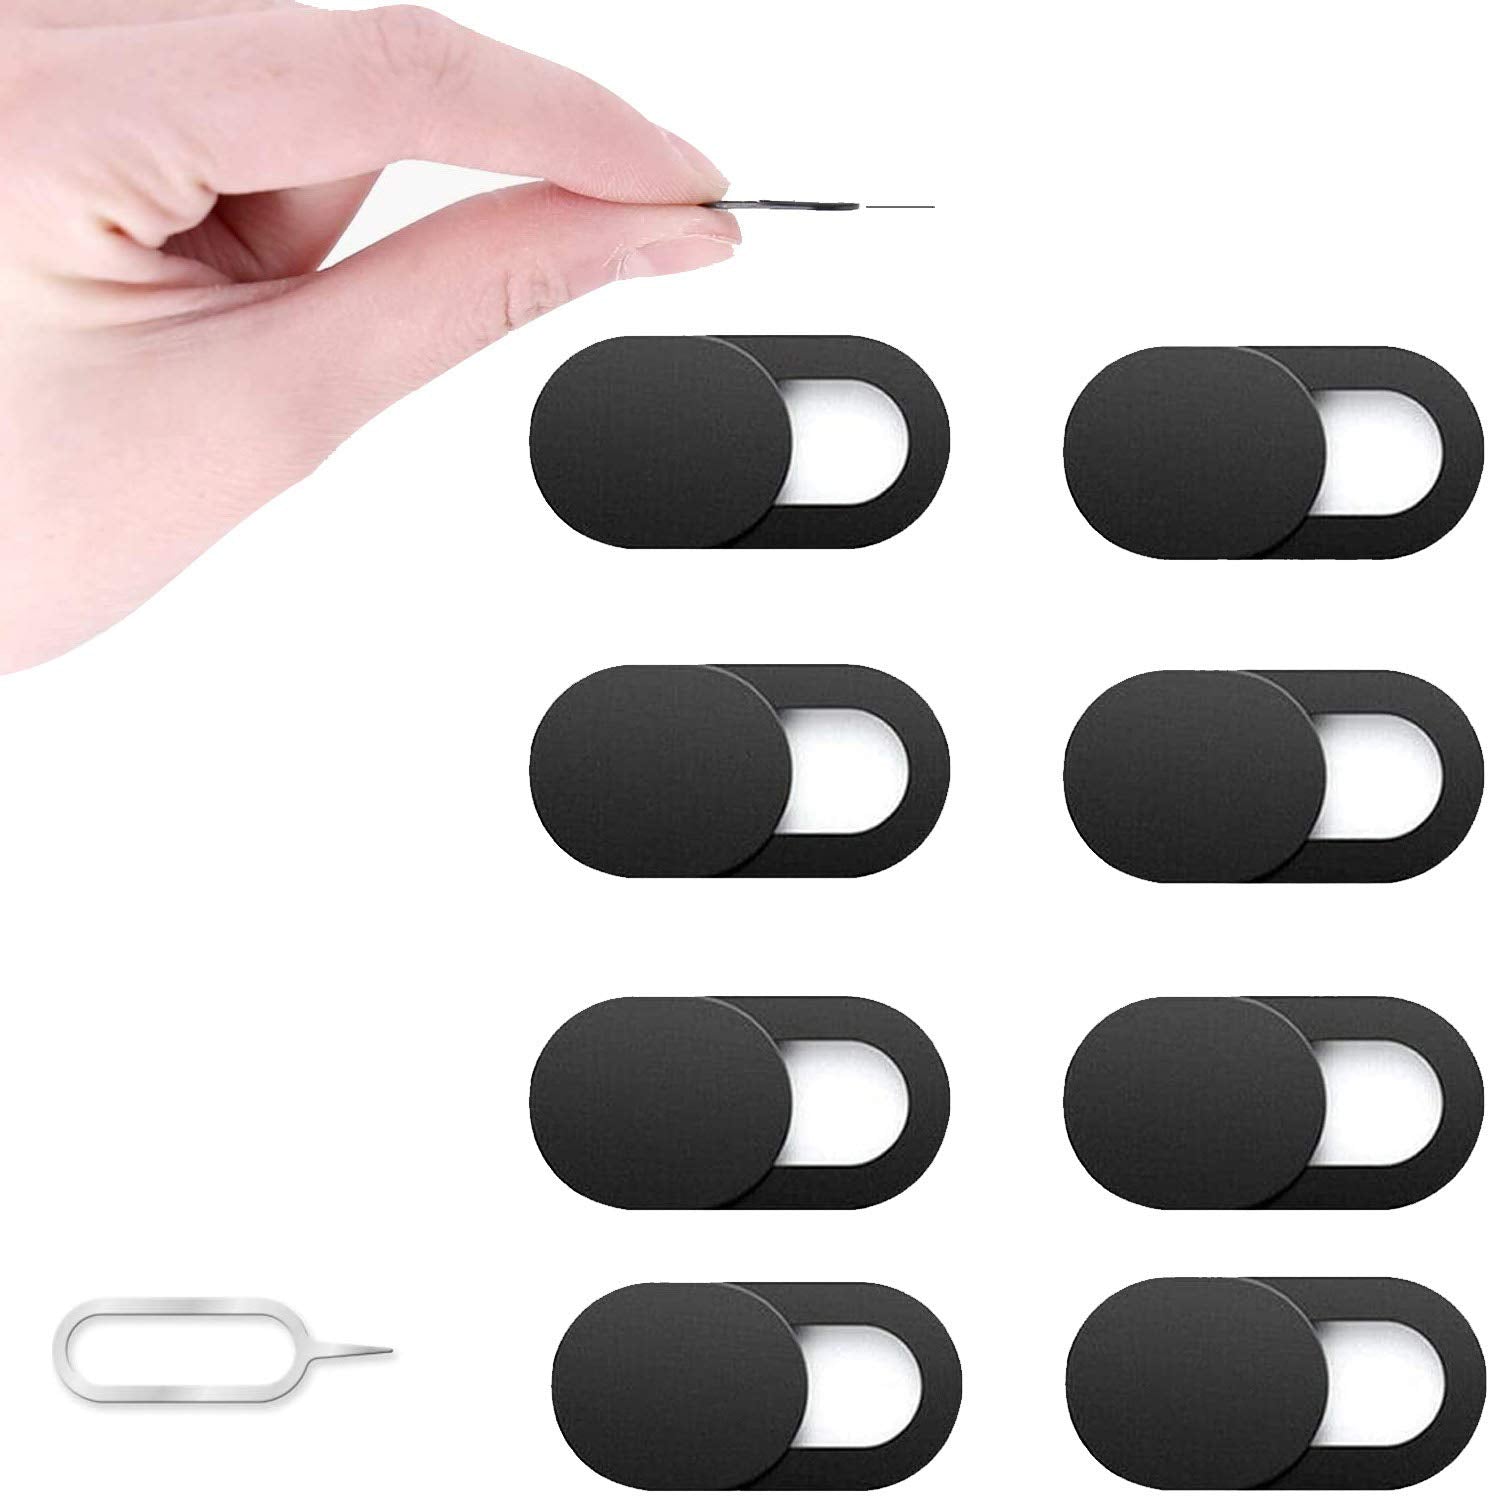 Ultra Thin Webcam Covers (8-Pack)